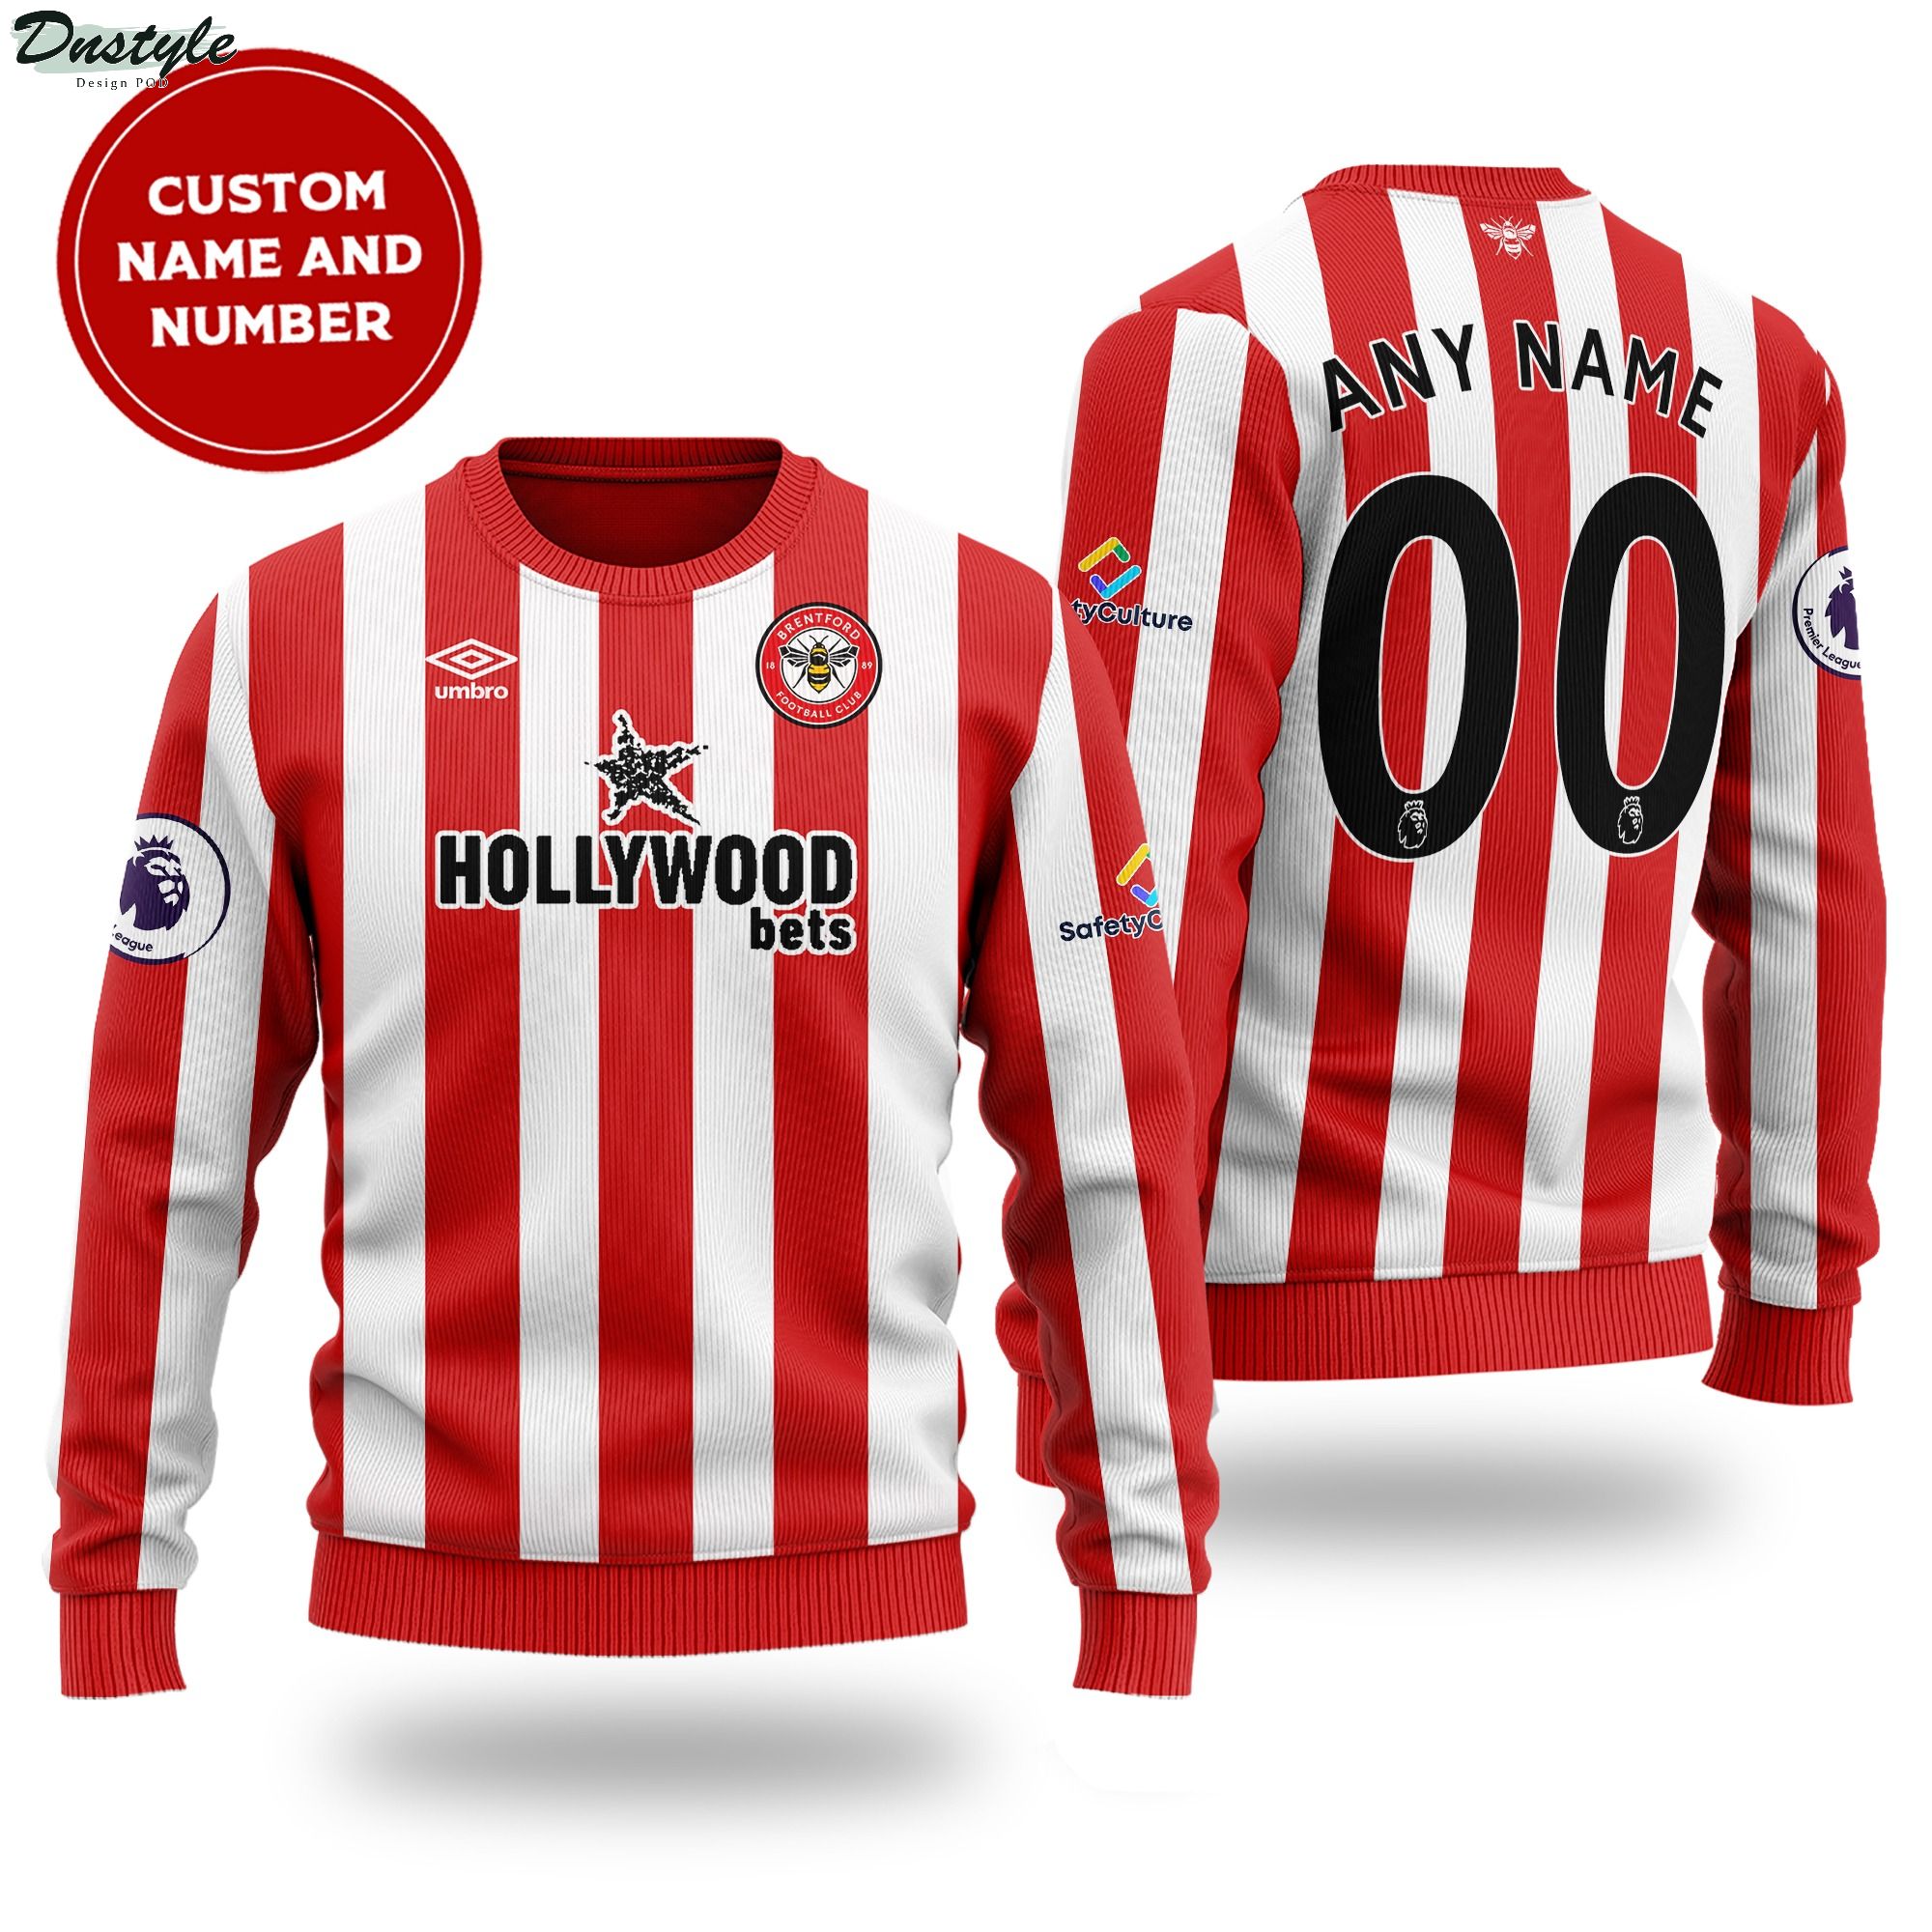 Brentford custom name and number ugly sweater